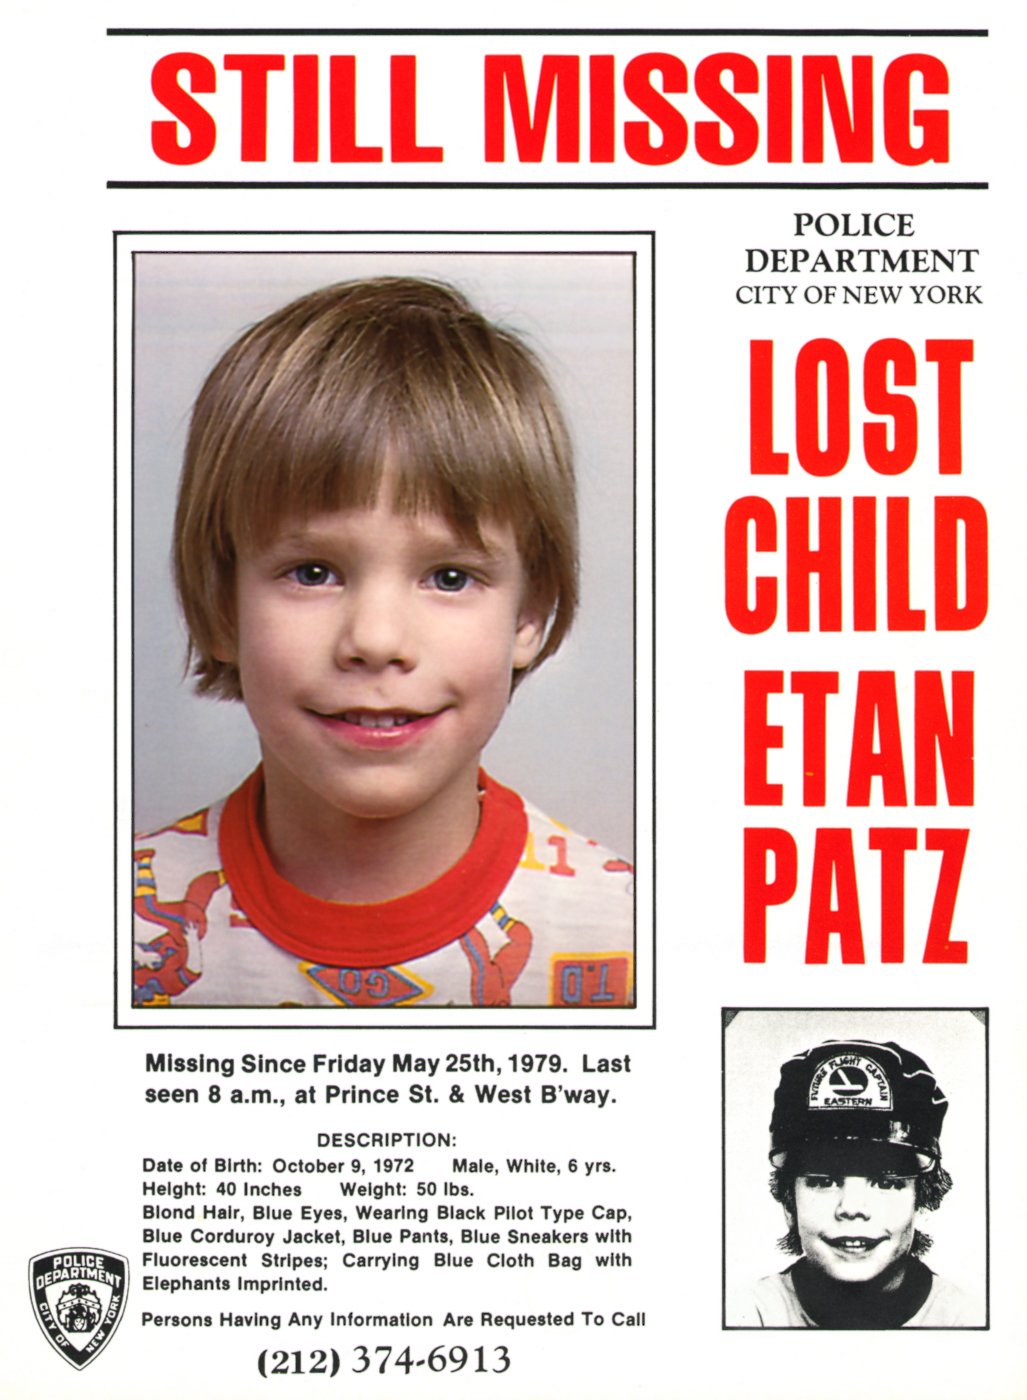 PHOTO: An undated image shows a flyer distributed by the New York Police Department showing Etan Patz who vanished in New York on May 25, 1979.